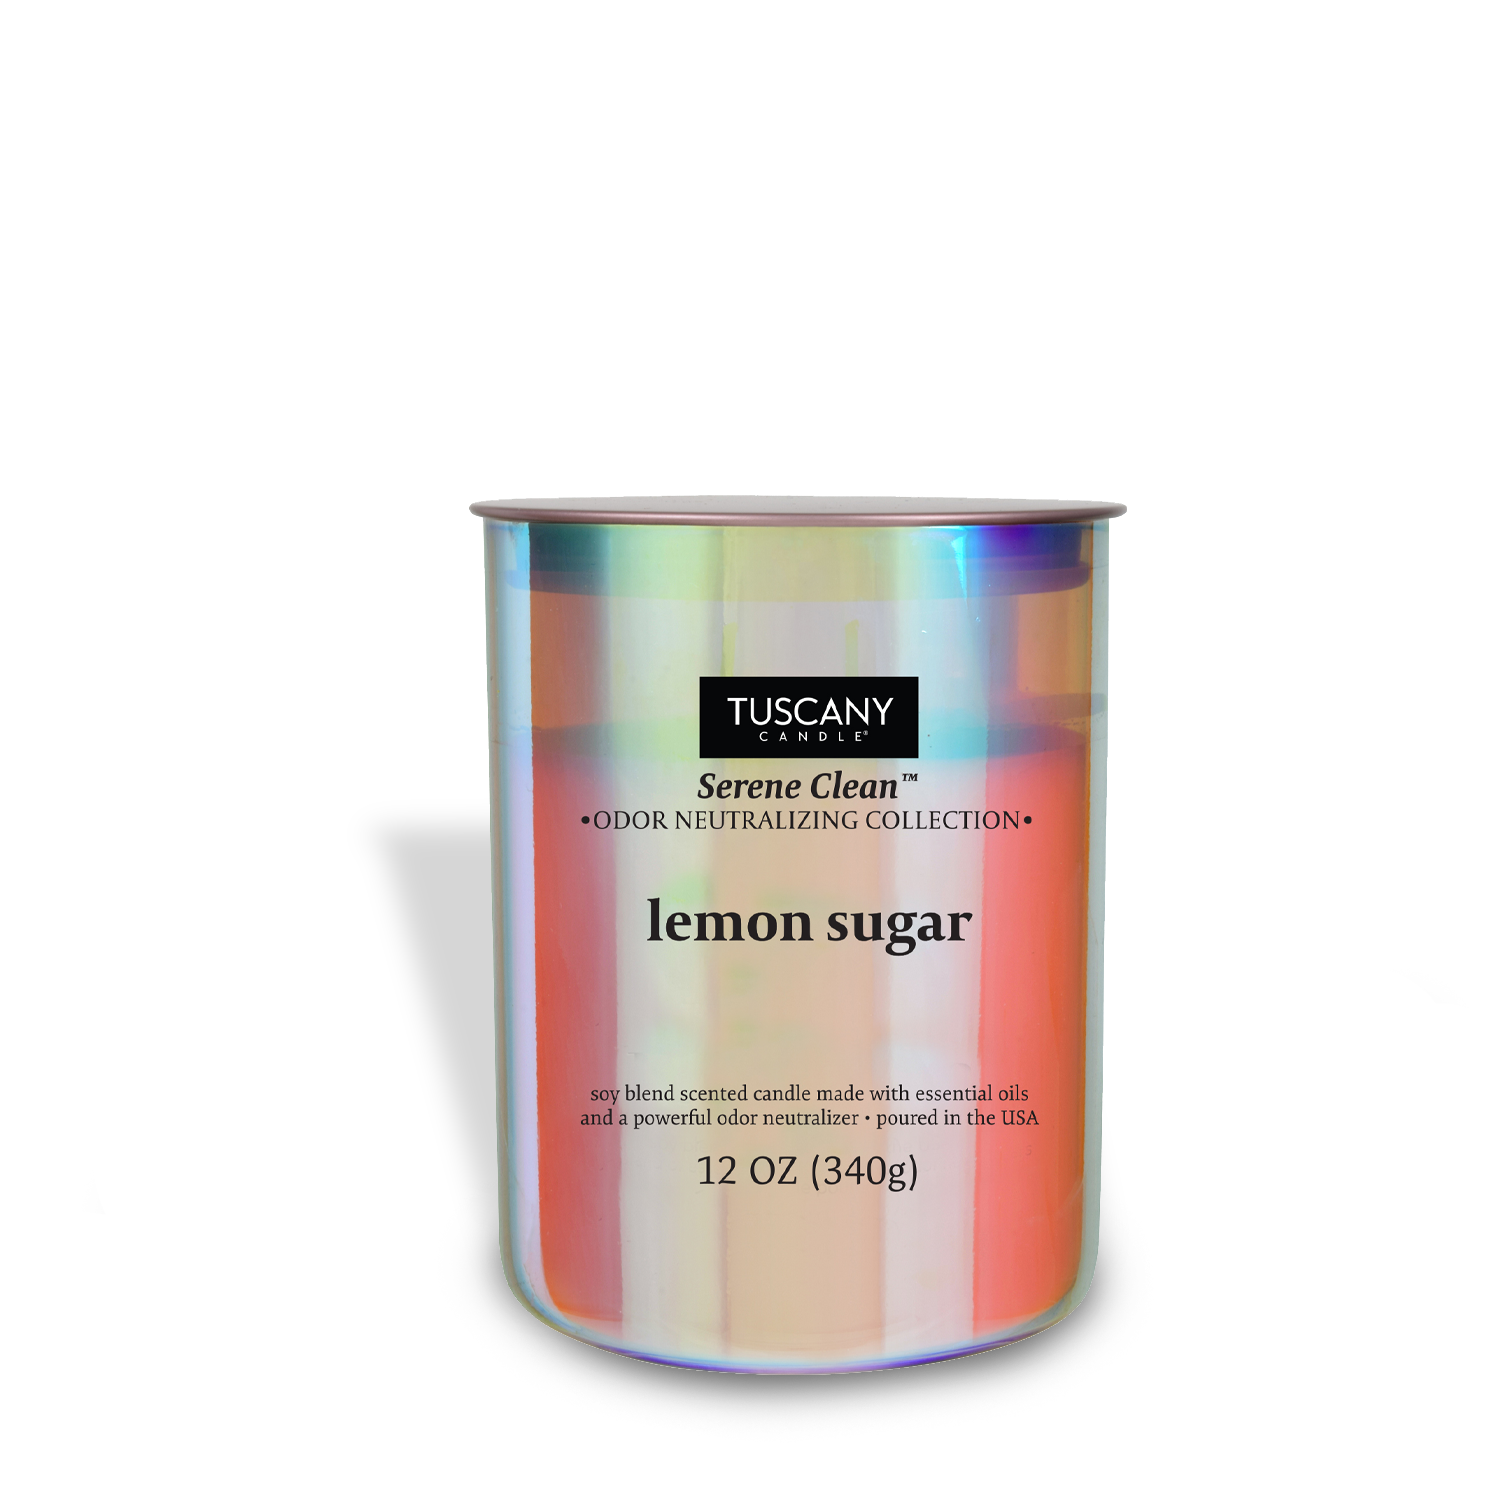 A Lemon Sugar Scented Jar Candle (12 oz) from the Serene Clean Collection by Tuscany Candle® EVD on a white background.